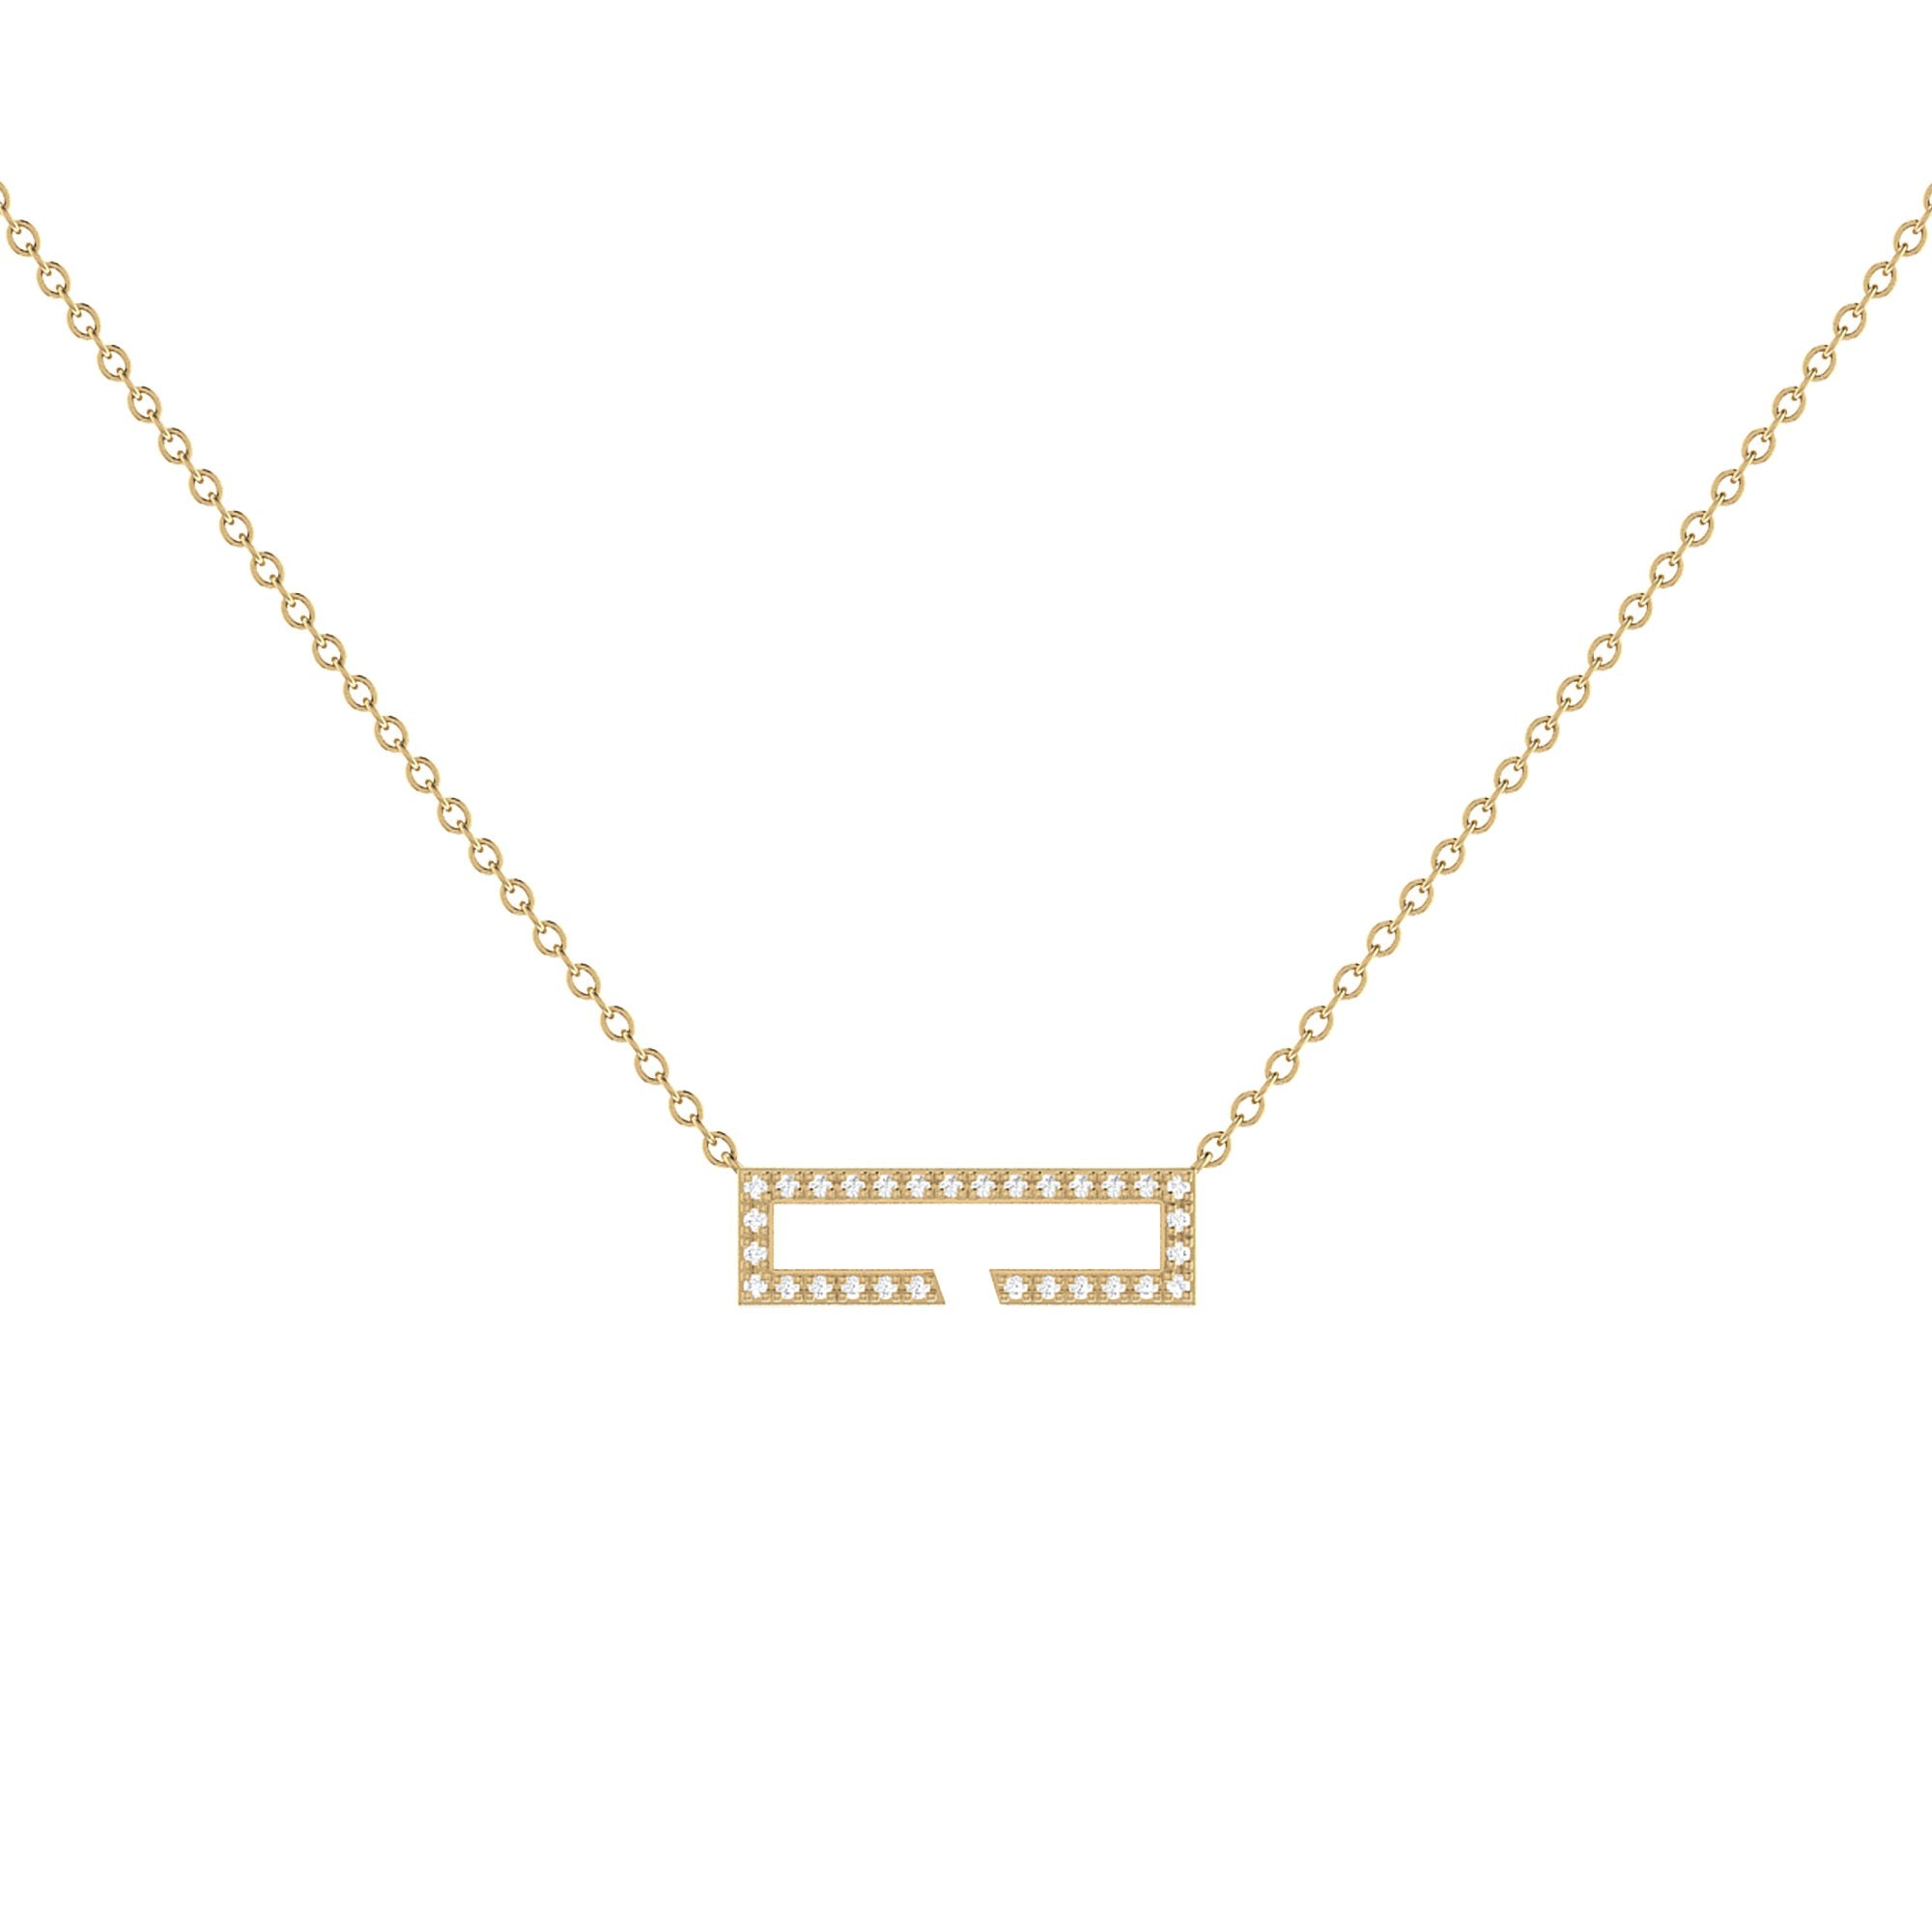 Elegant Swing Diamond Necklace in 14K Yellow Gold - Natural Stones, Micro Pave Setting, 18" Chain Bijou Her